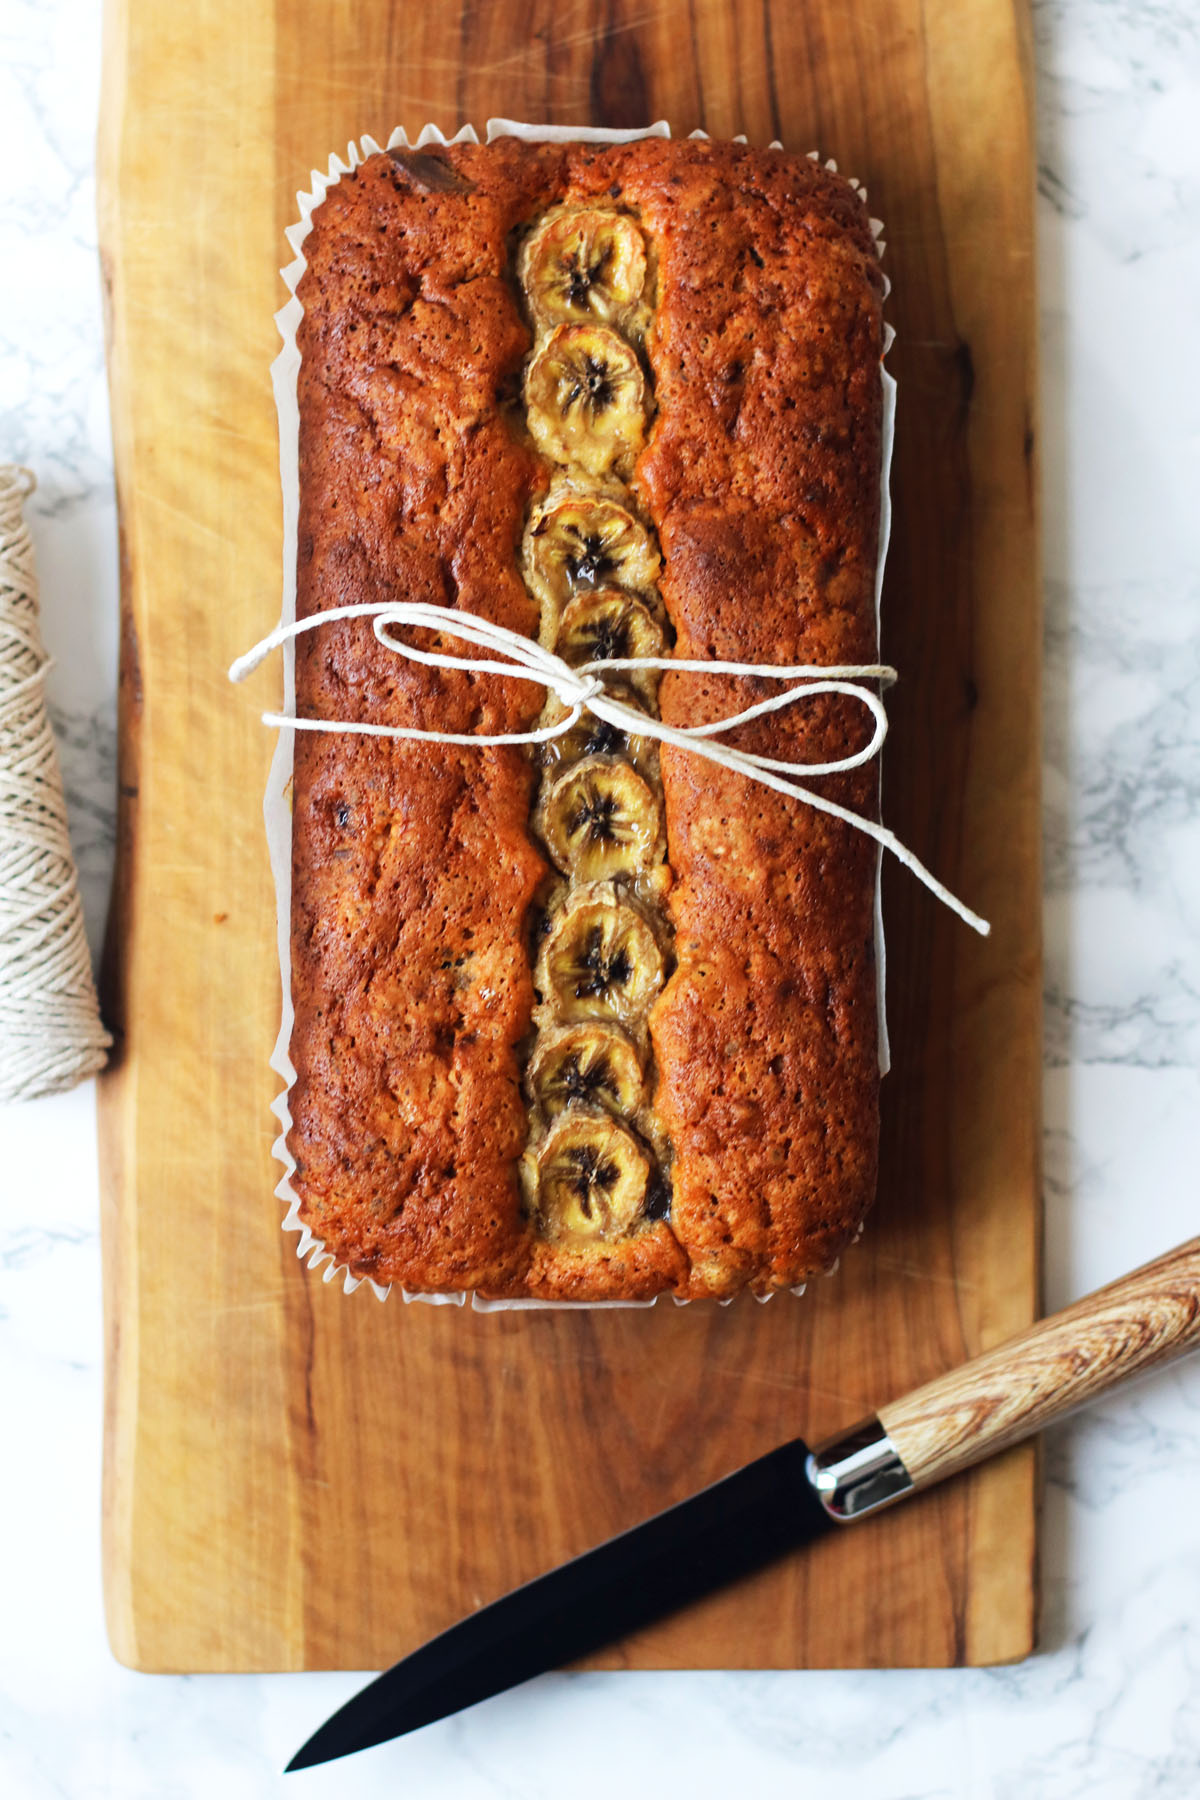 The Ultimate Chocolate Chip Banana Bread is a family favourite. It's perfect for a decadent breakfast or afternoon snack!